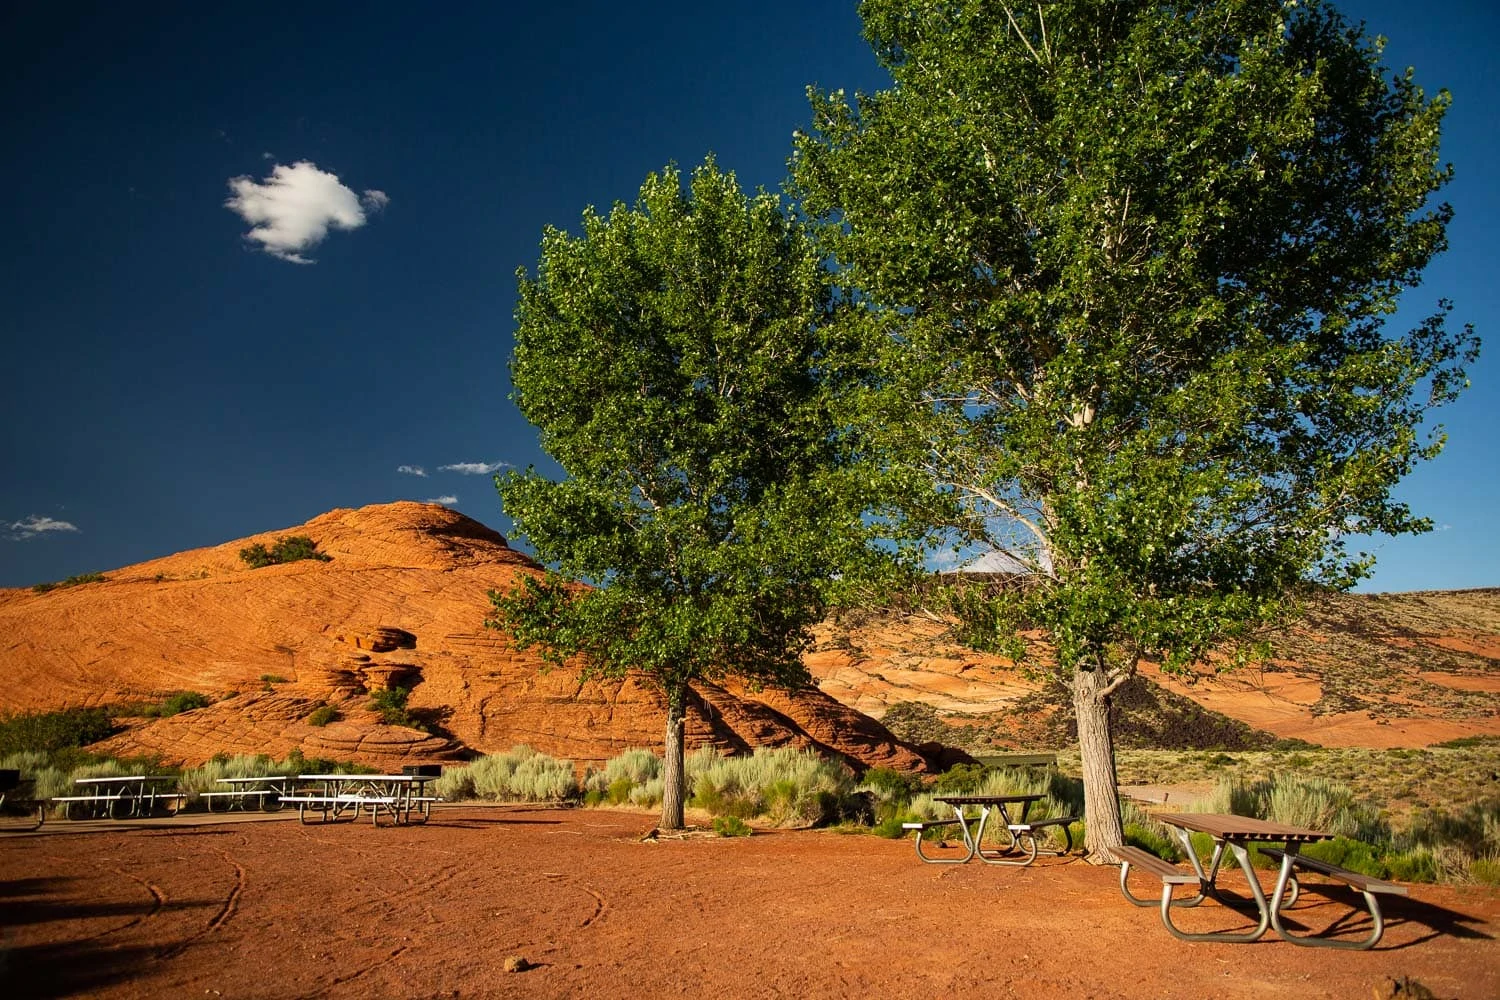 The lower galoot picnic area in Snow Canyon State Park is a designated ceremony location for elopements and weddings.